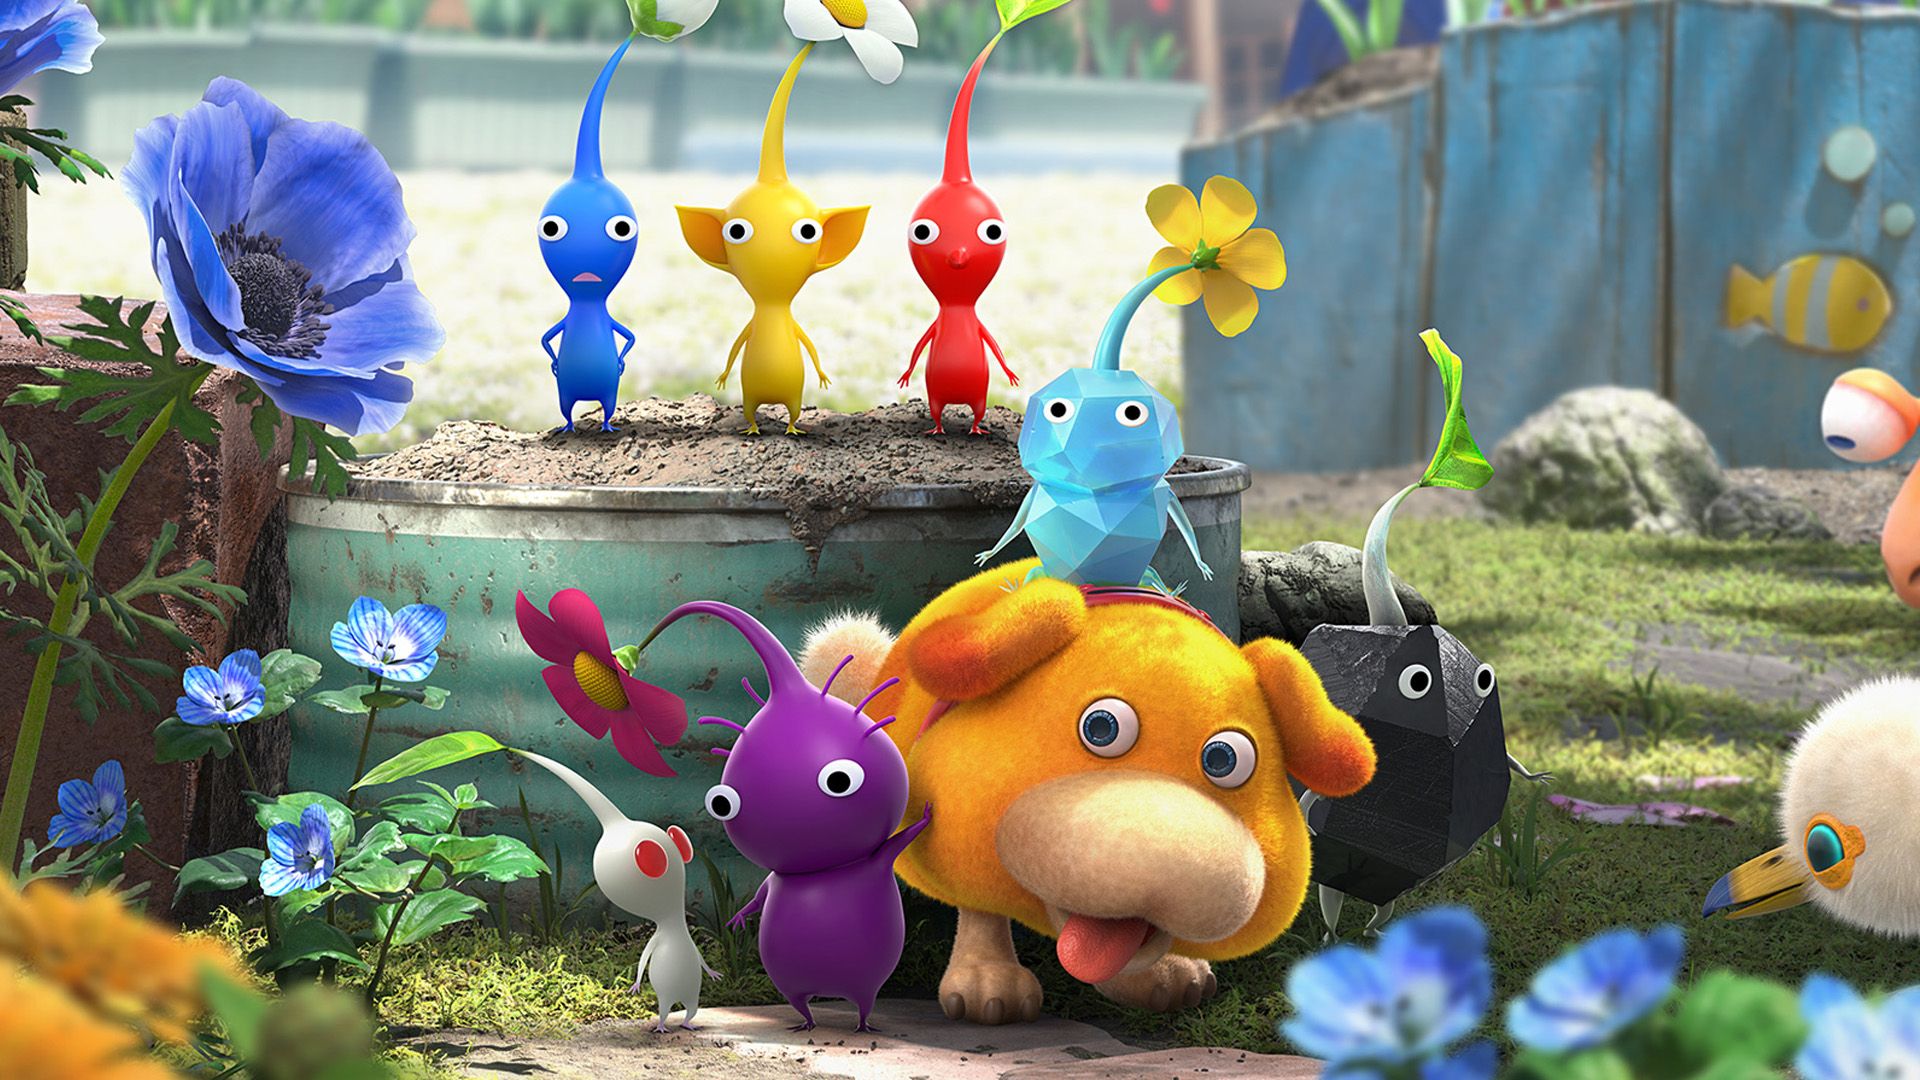 DigitallyDownloaded.net reviews the latest Pikmin game; this is the hero image from that game.